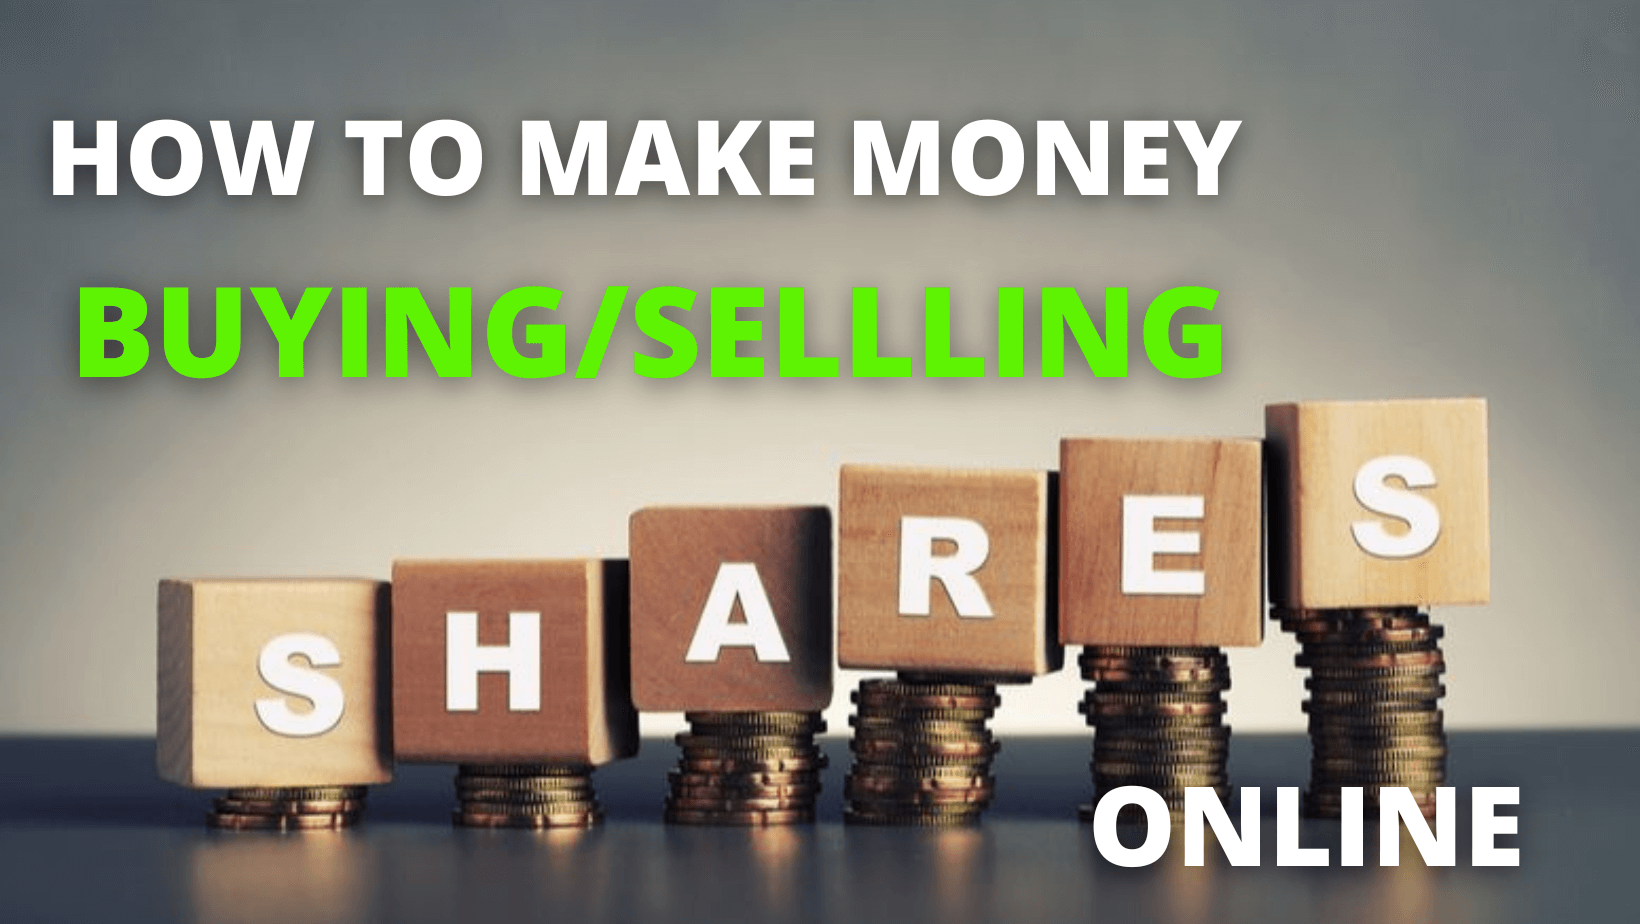 How To Make Money Buying/Selling Shares Online